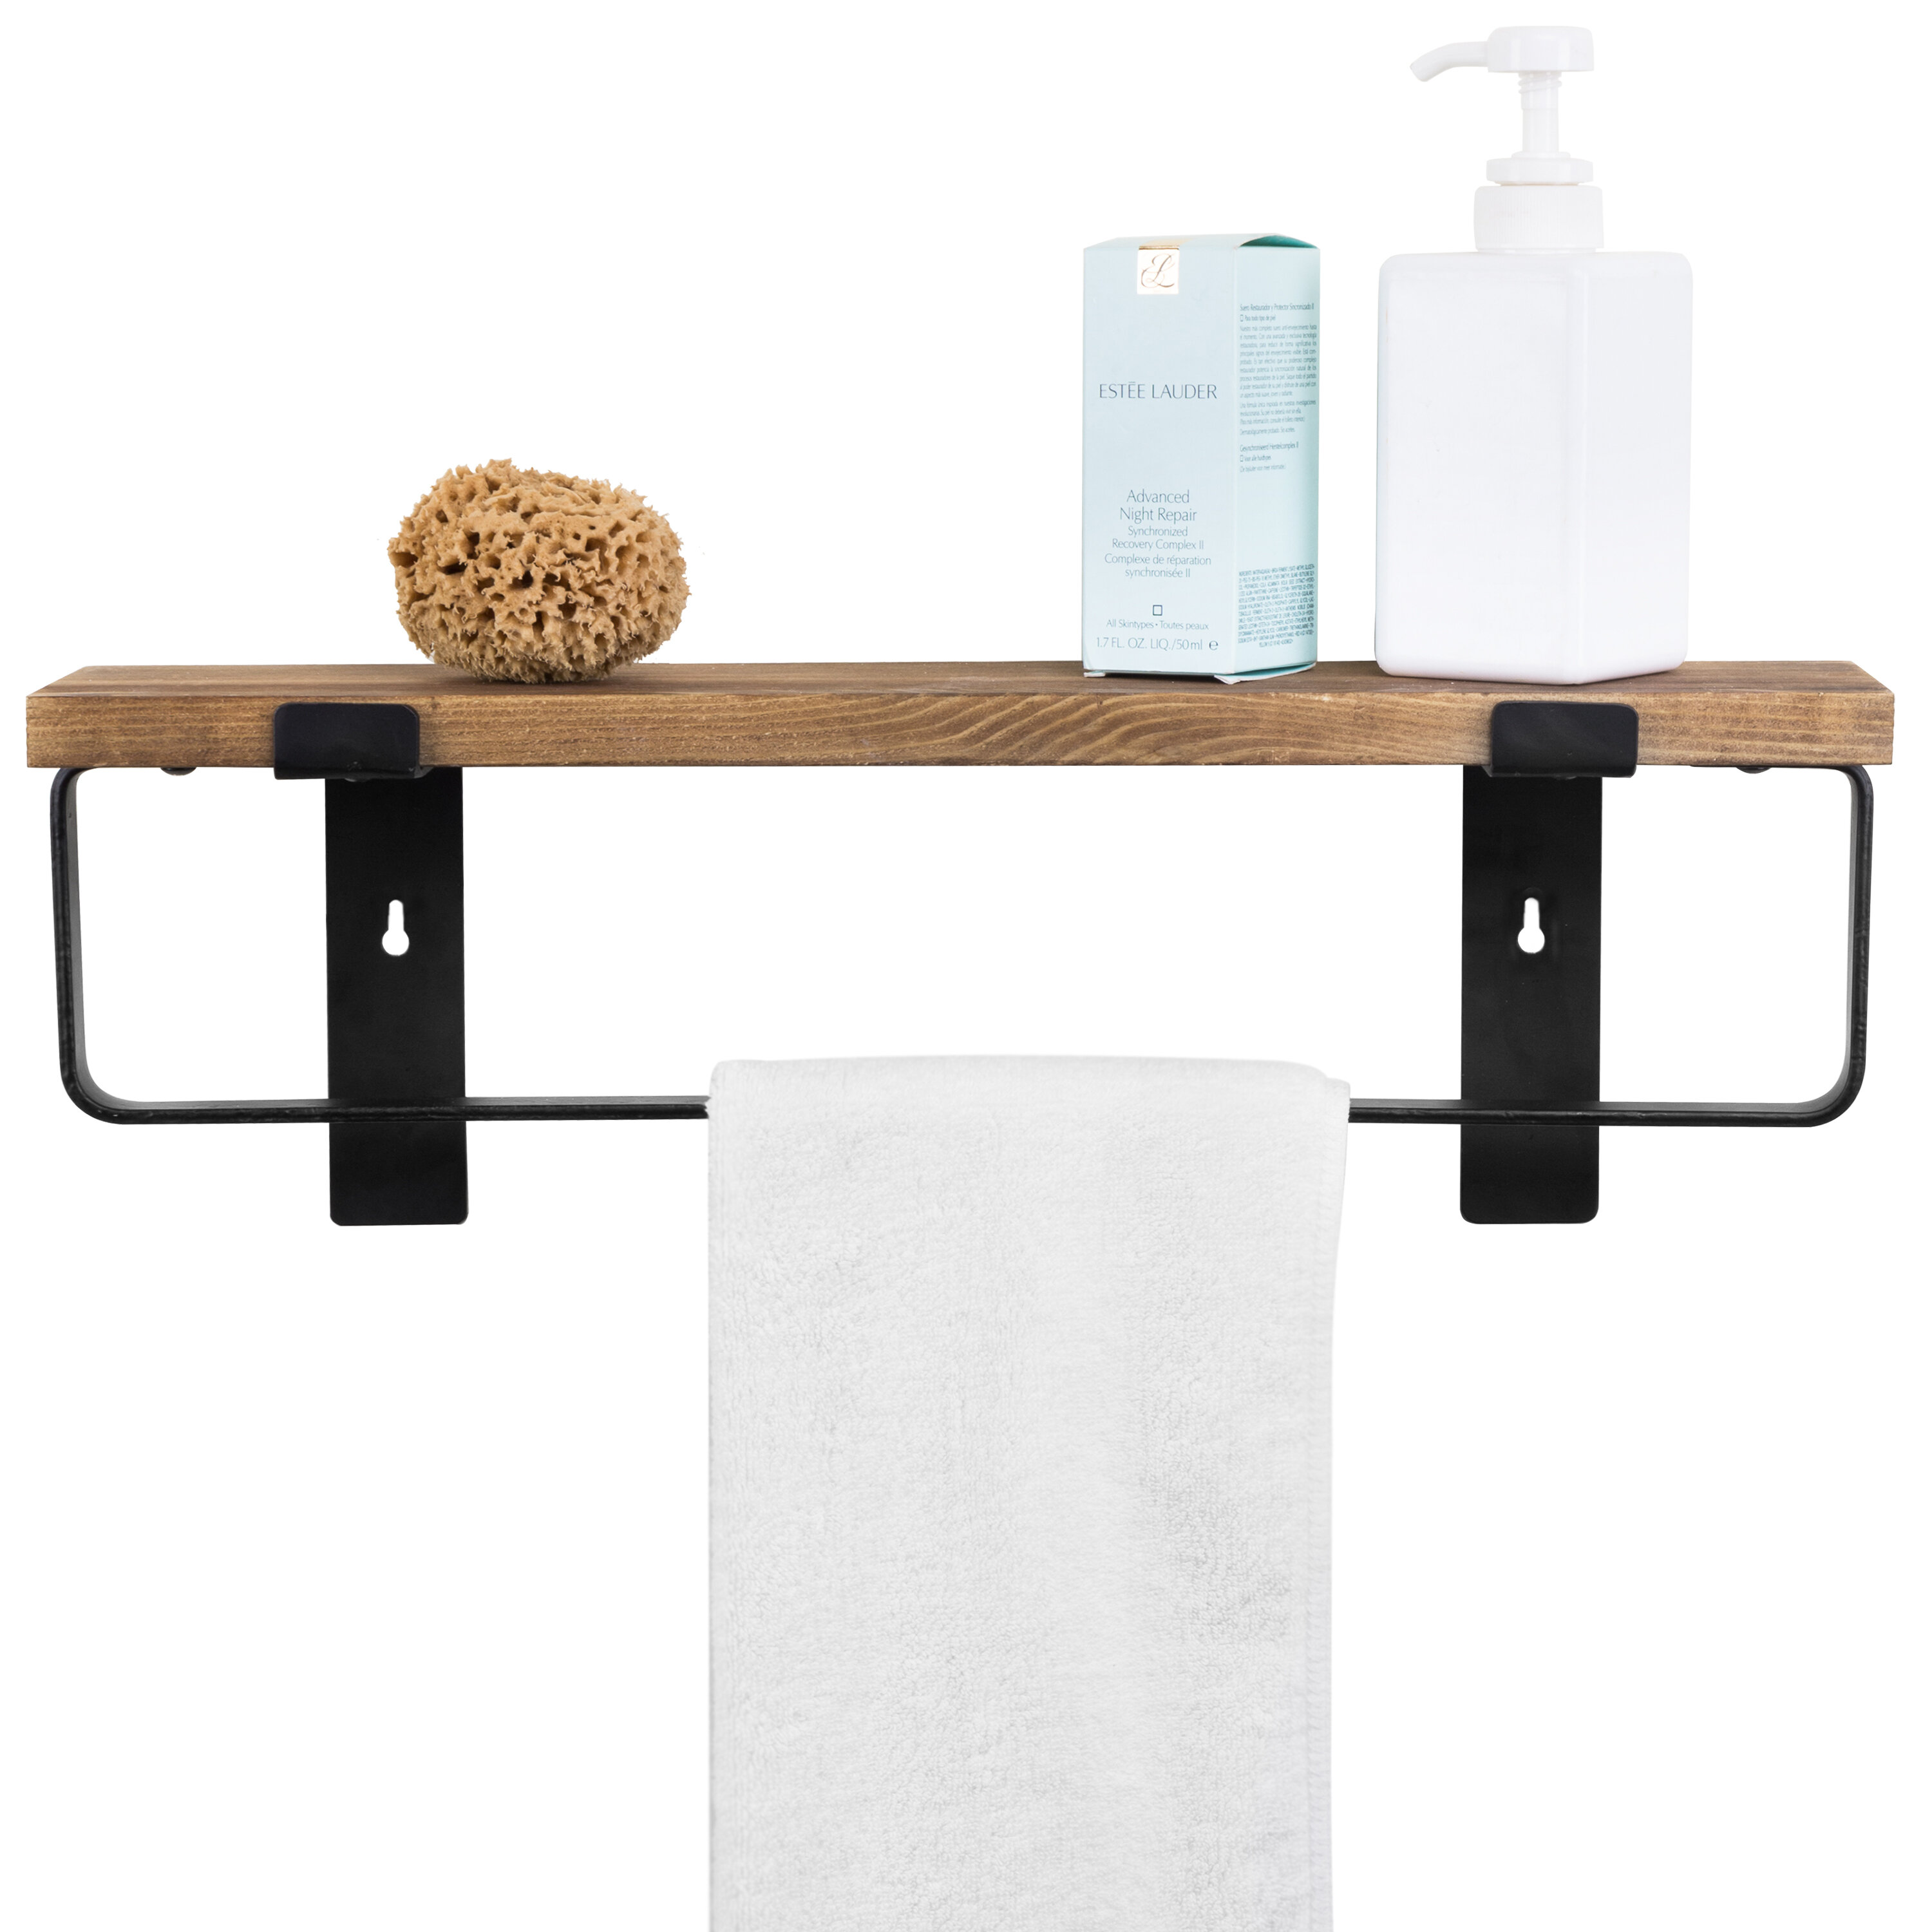 Industrial Triangle Pipe Hand Towel Rack Wall Mounted Towel Holder Black US